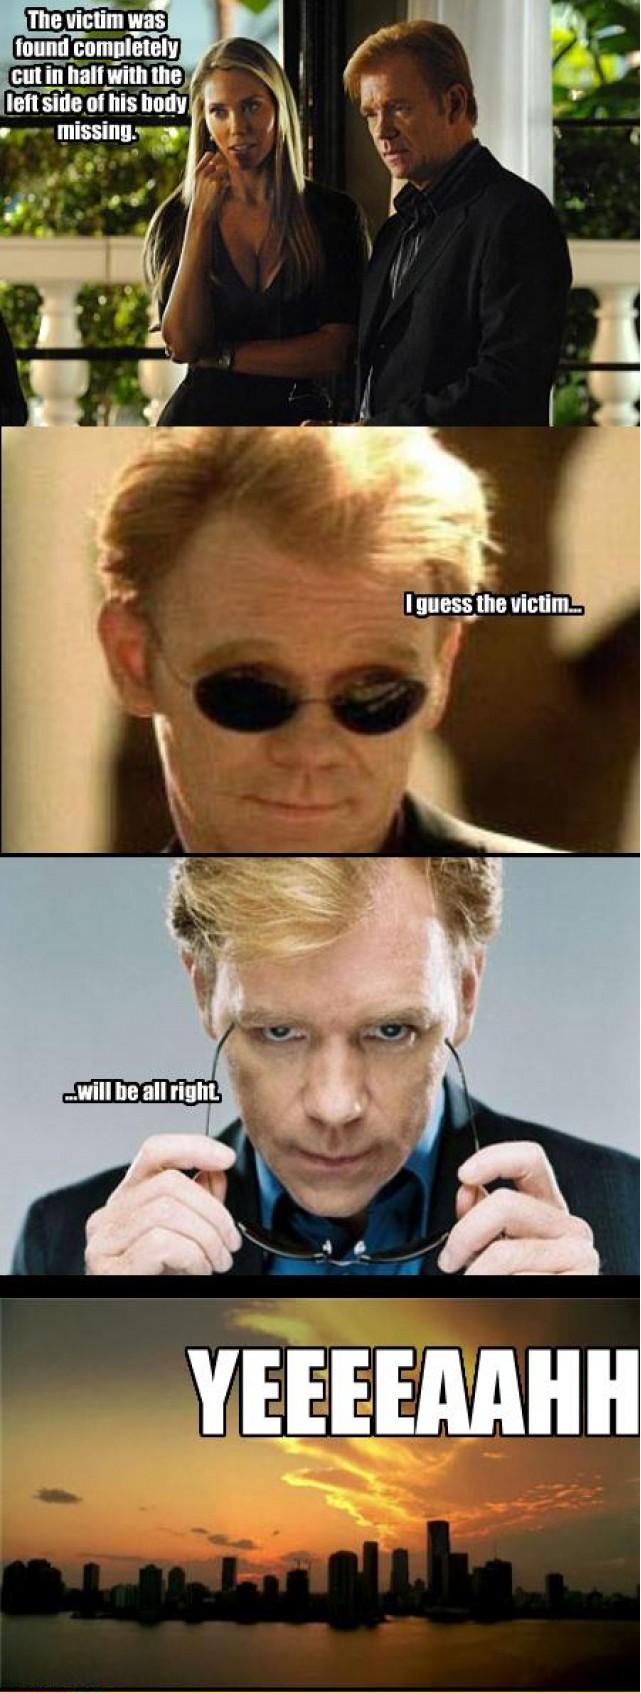 csi miami meme iron - The victim was found completely cut in half with the left side of his body missing. I guess the victim... will be all right Yeeeeaahh